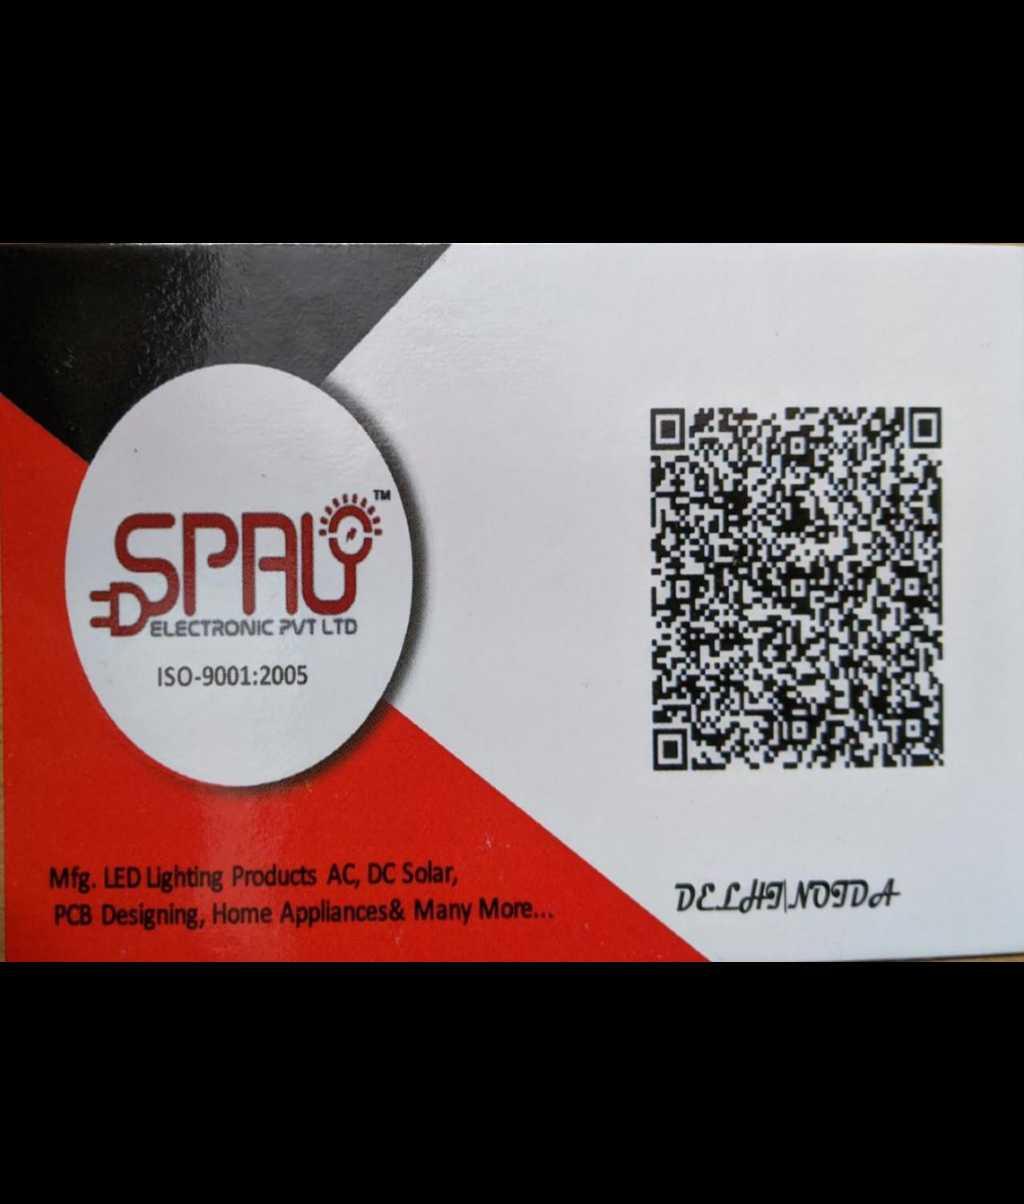 SPAU ELECTRONIC PRIVATE LIMITED